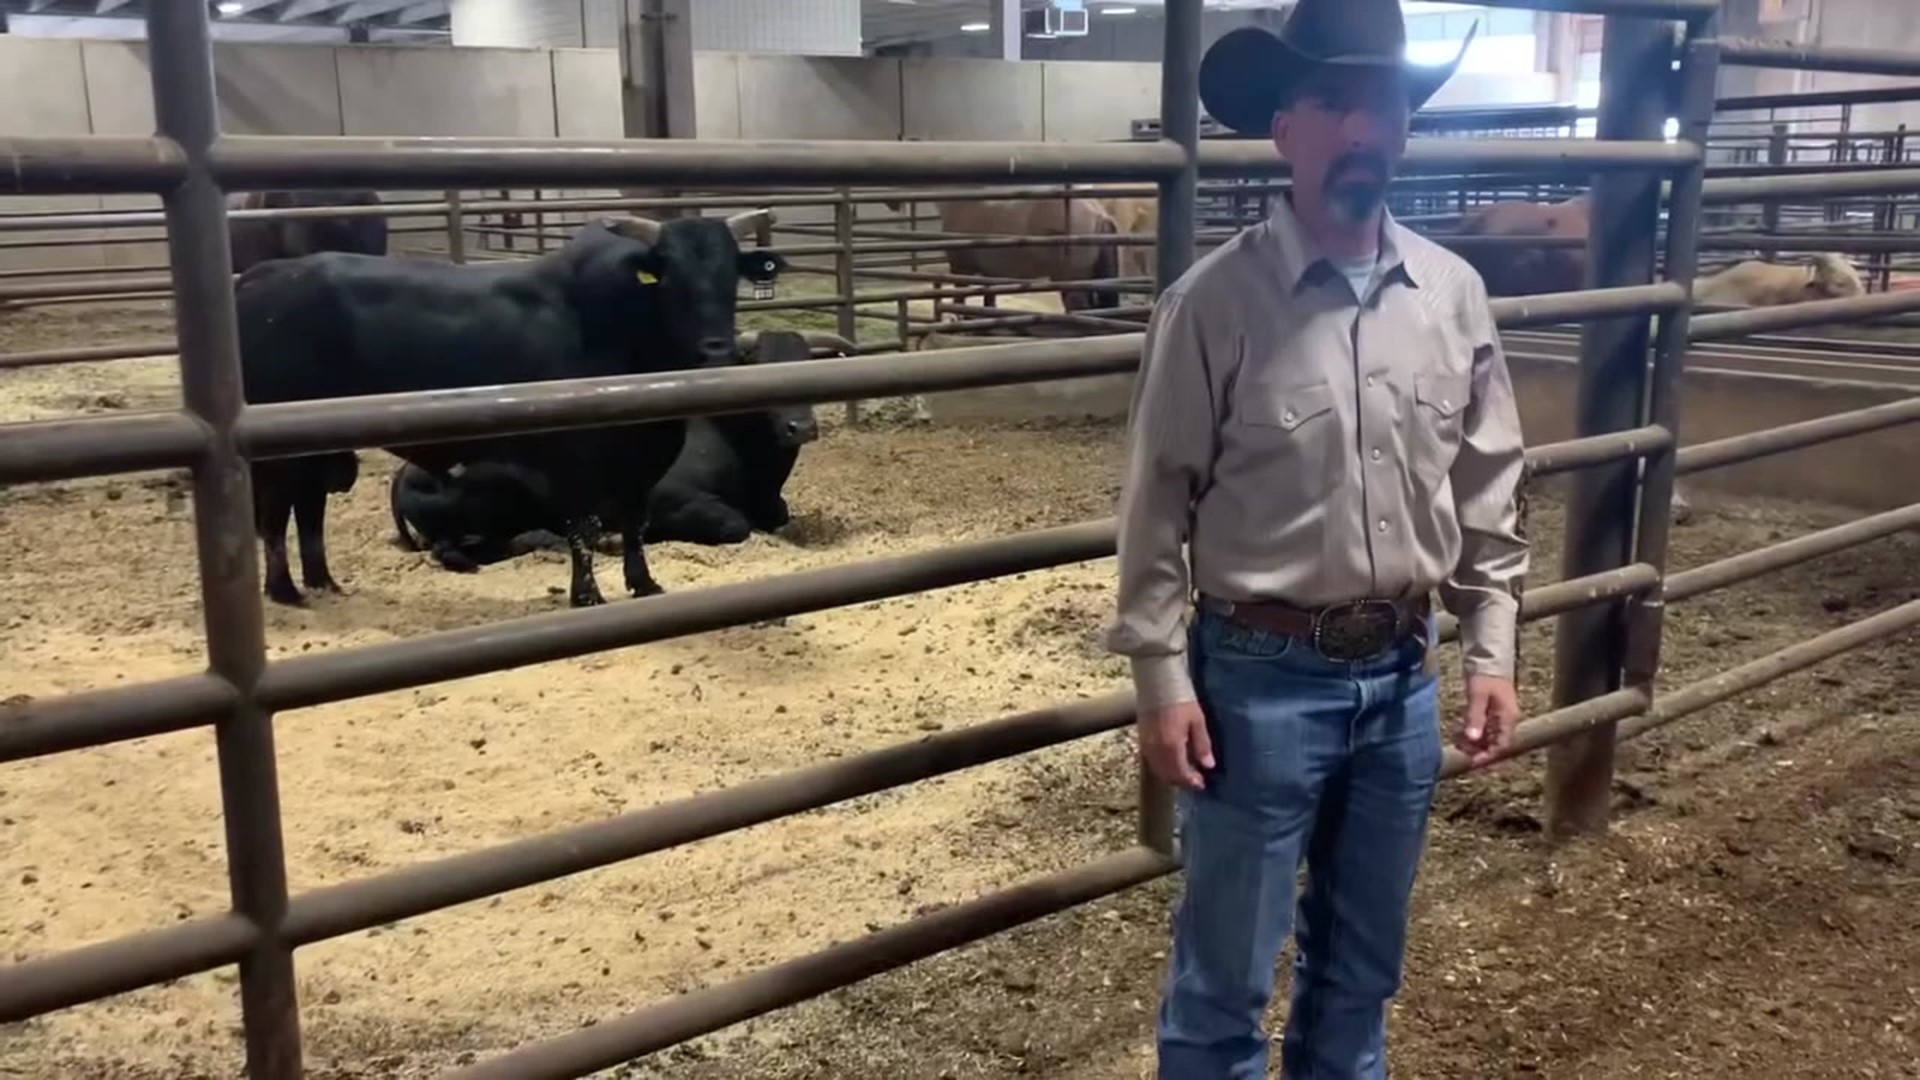 A man from Jersey Shore has two bulls competing in the Professional Bull Riding World Finals in Texas.